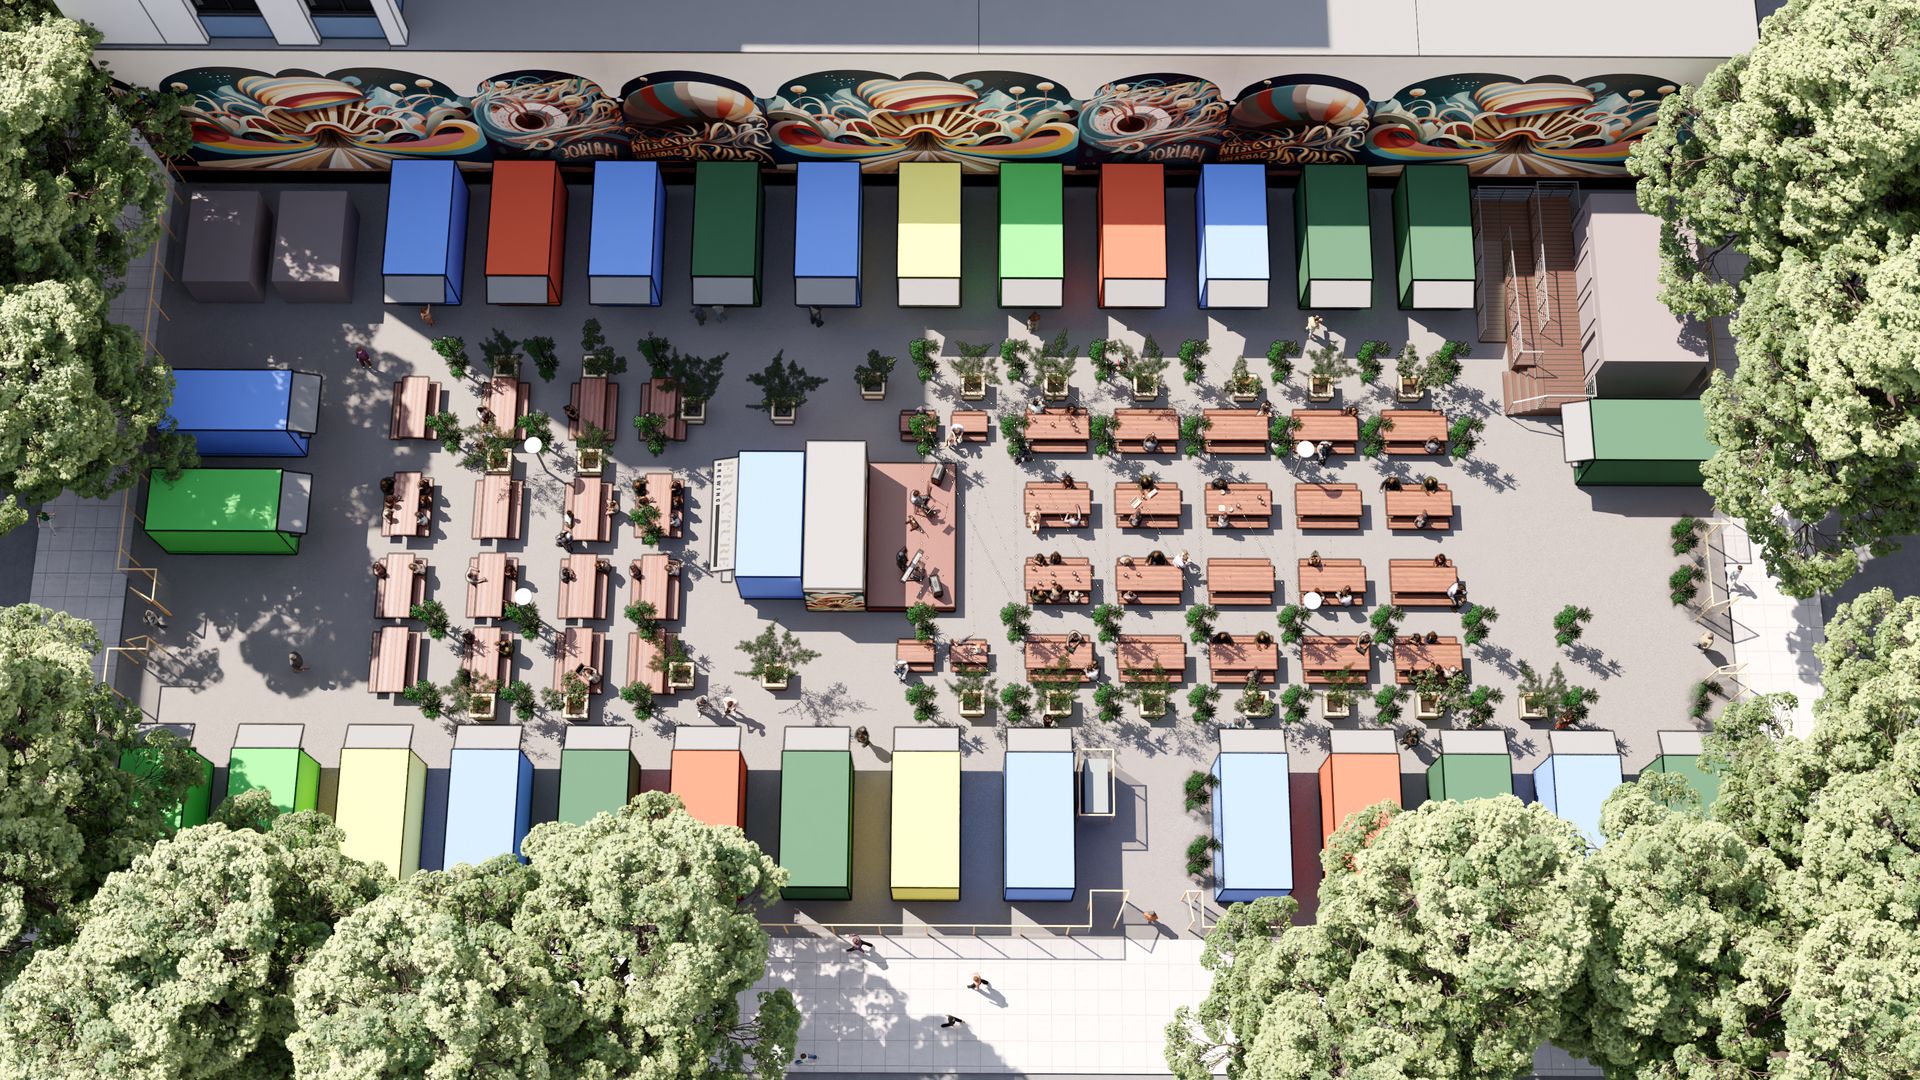 An artists rendering of a future food card pod from an arial view, with chairs and tables on a plaza lined by food trucks with colorful roofs and edged by trees.